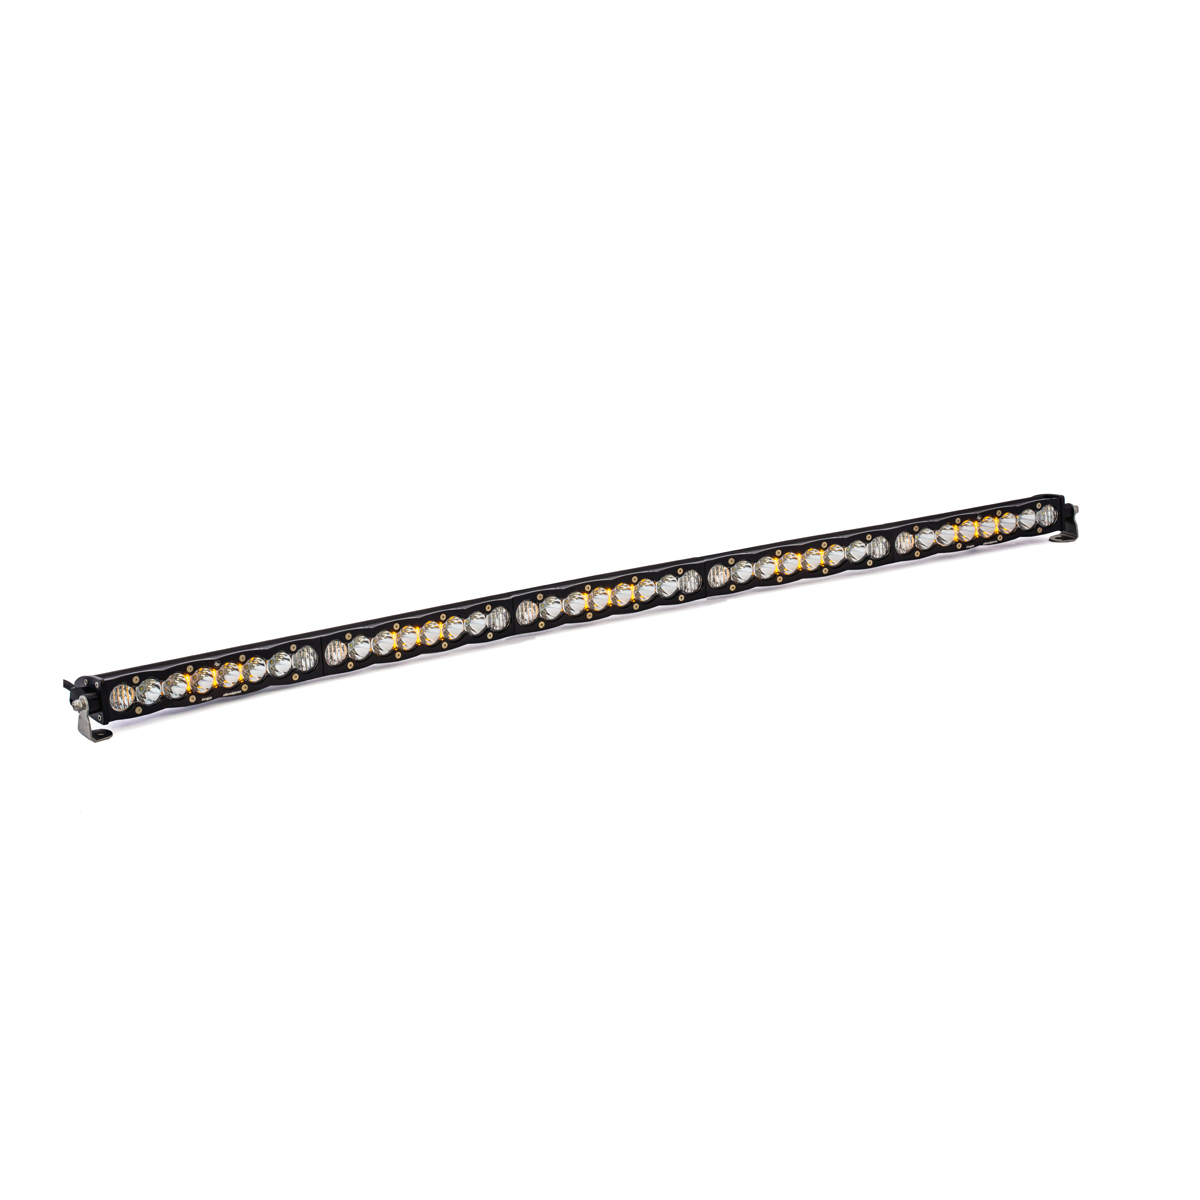 Baja Designs 50 Inch LED Light Bar Driving Combo Pattern S8 Series - Click Image to Close